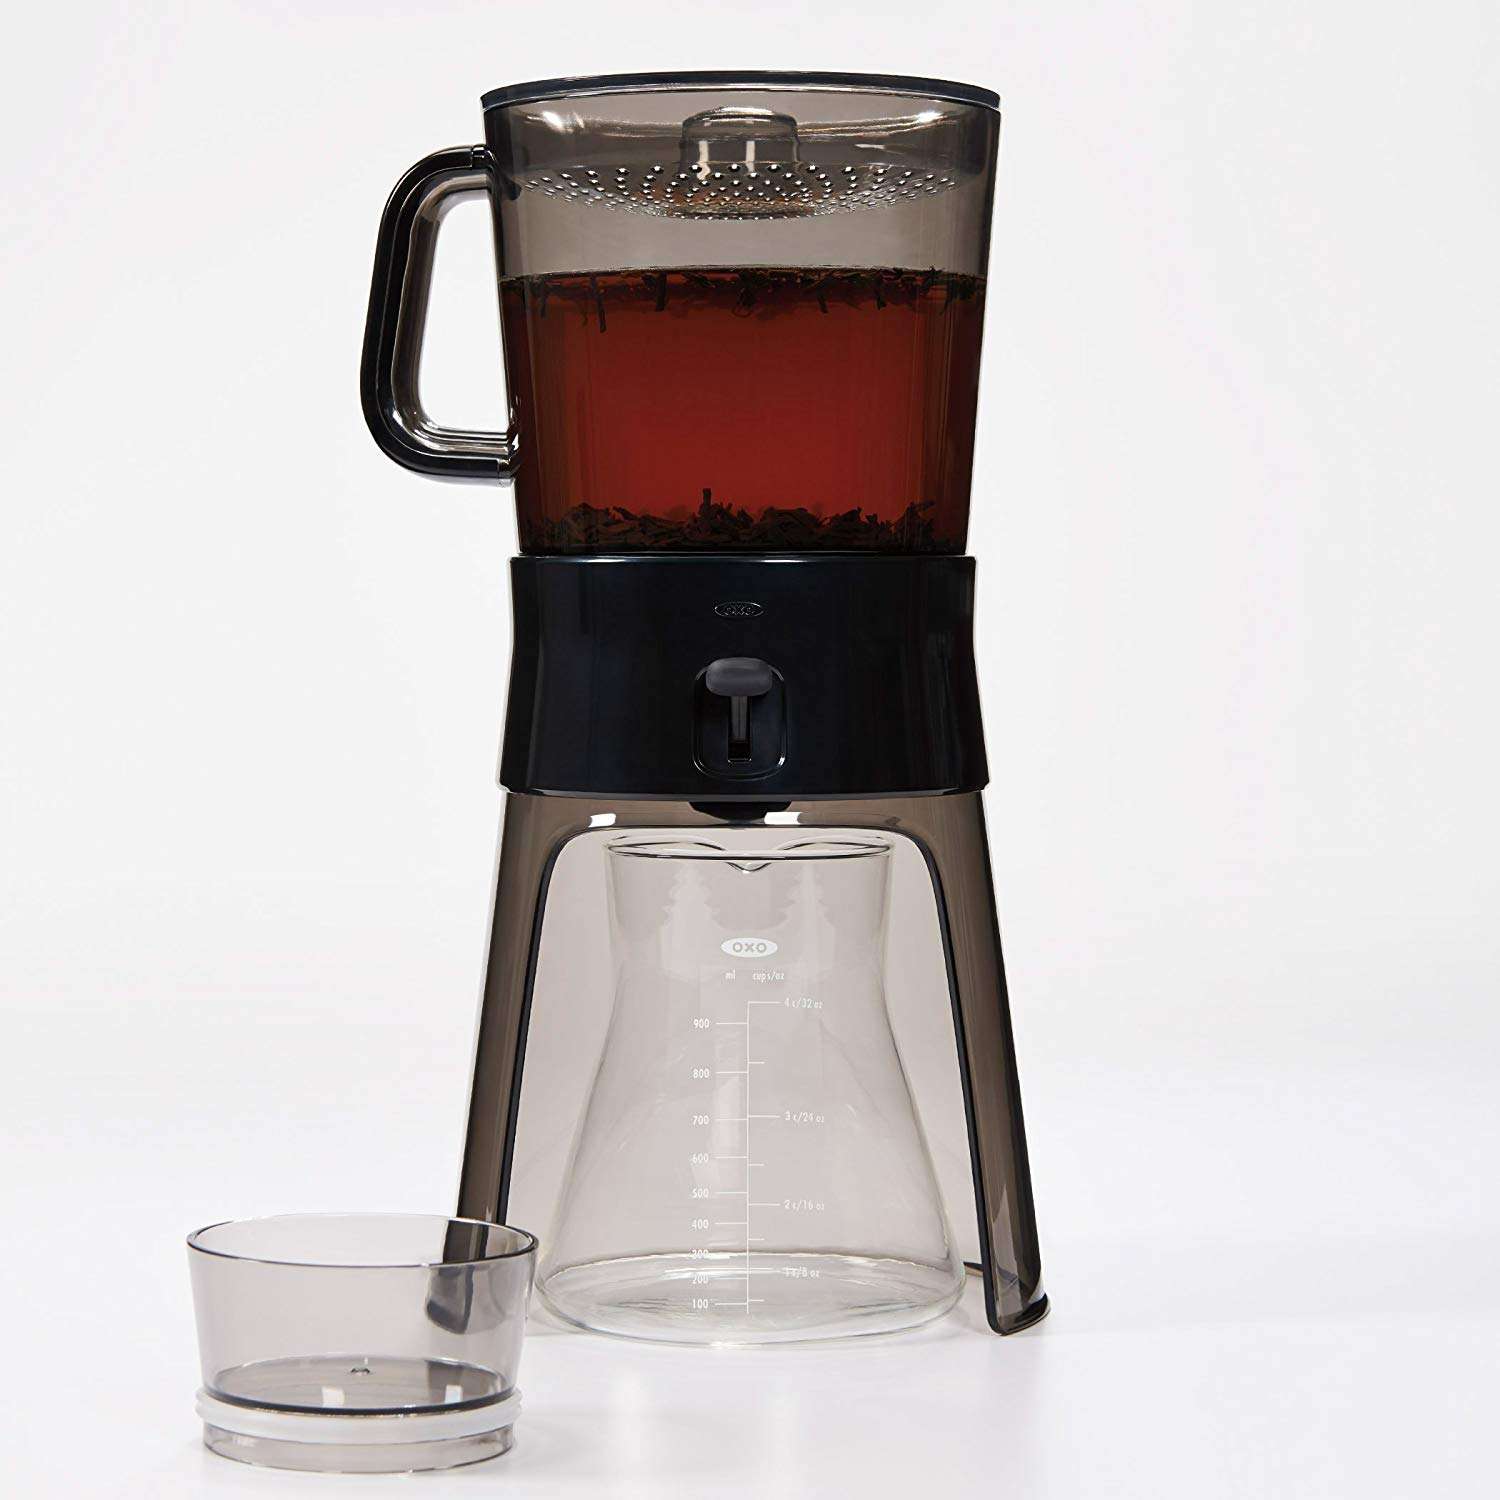 OXO Cold Brew Coffee Maker, Filter Coffee Machines Reviews and Comments